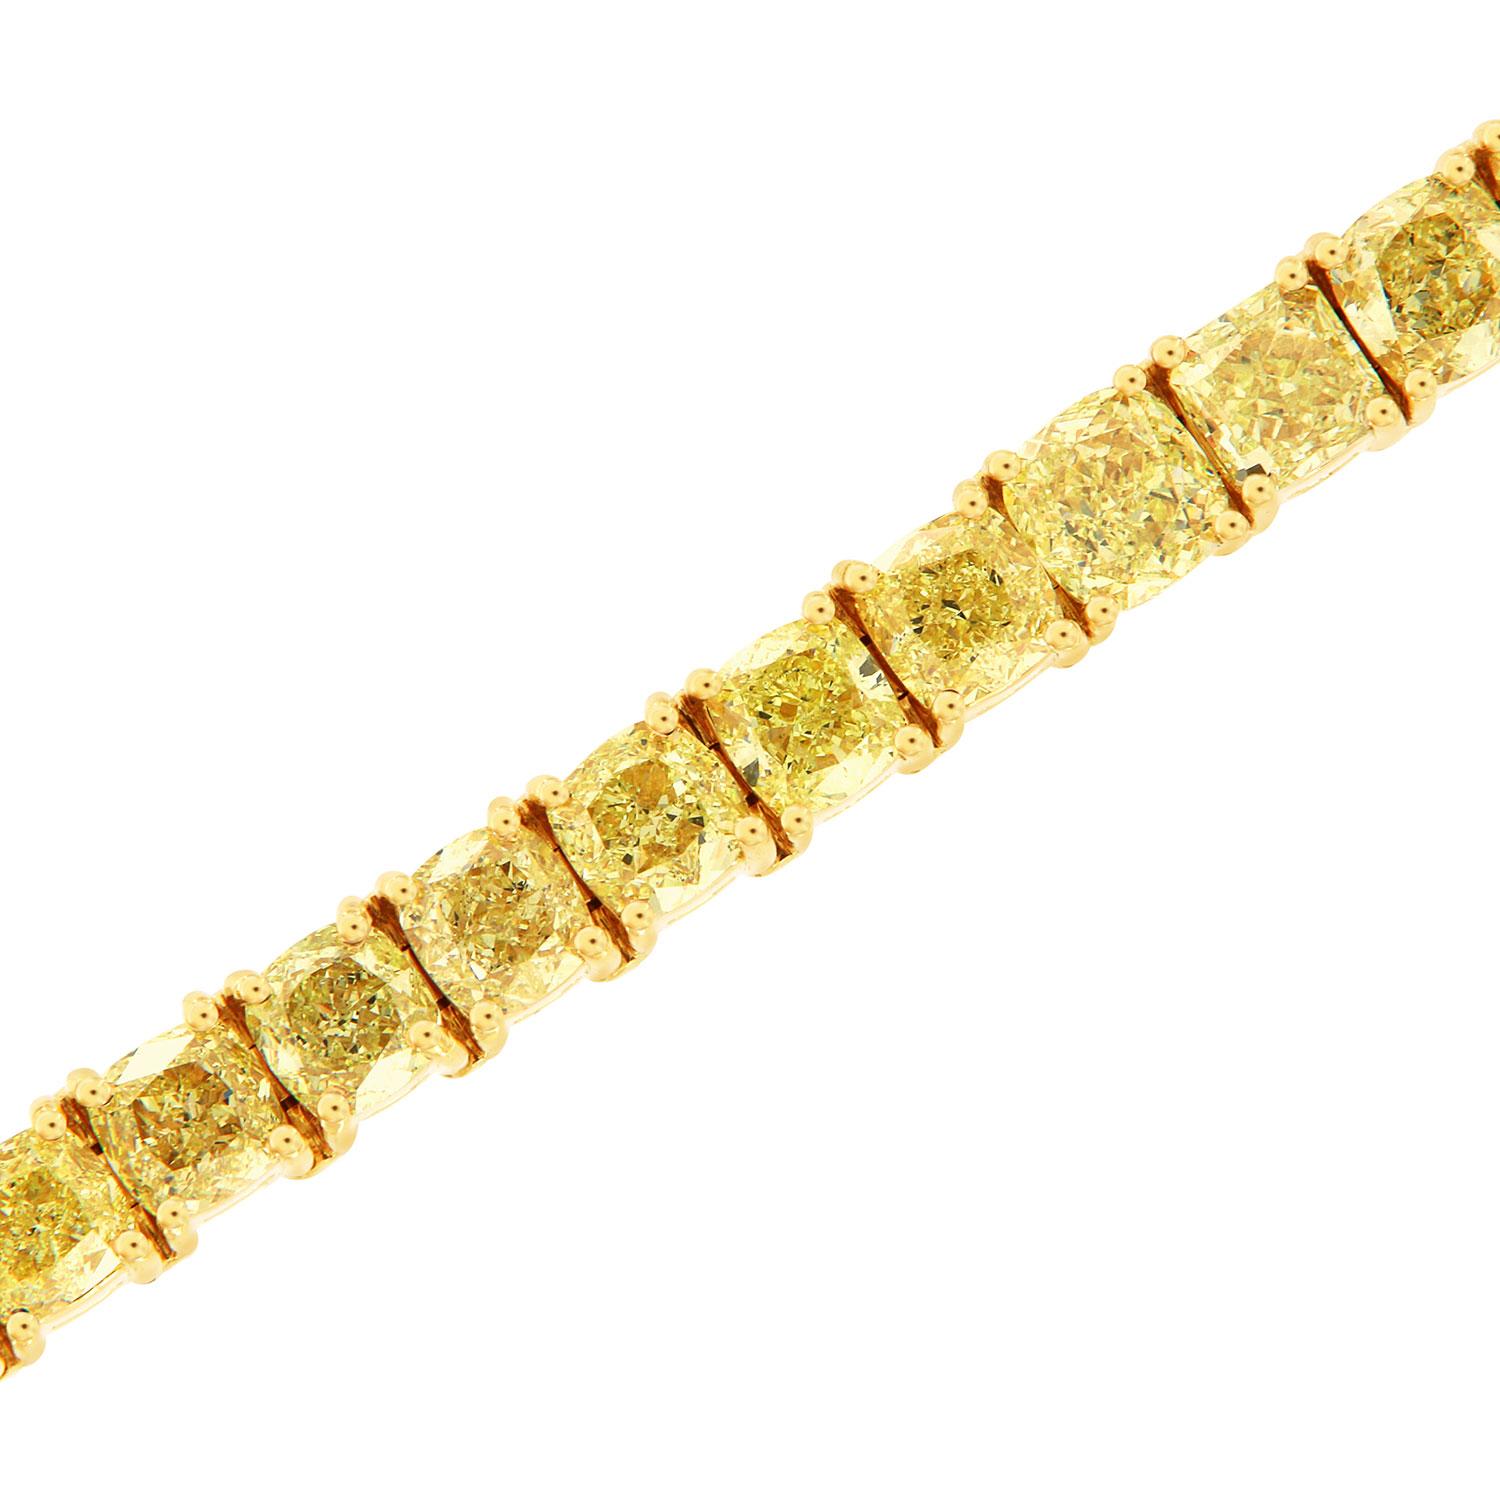 This one-of-a-kind handcrafted bracelet features 38 Cushion-shapes Yellow diamonds in a total weight of 20.5 carats. 
The diamonds size breakdown is:
Seven (7) Diamonds from 0.31 Carat to 0.38 Carat
Six (6) Diamonds from 0.40 Carat to 0.42